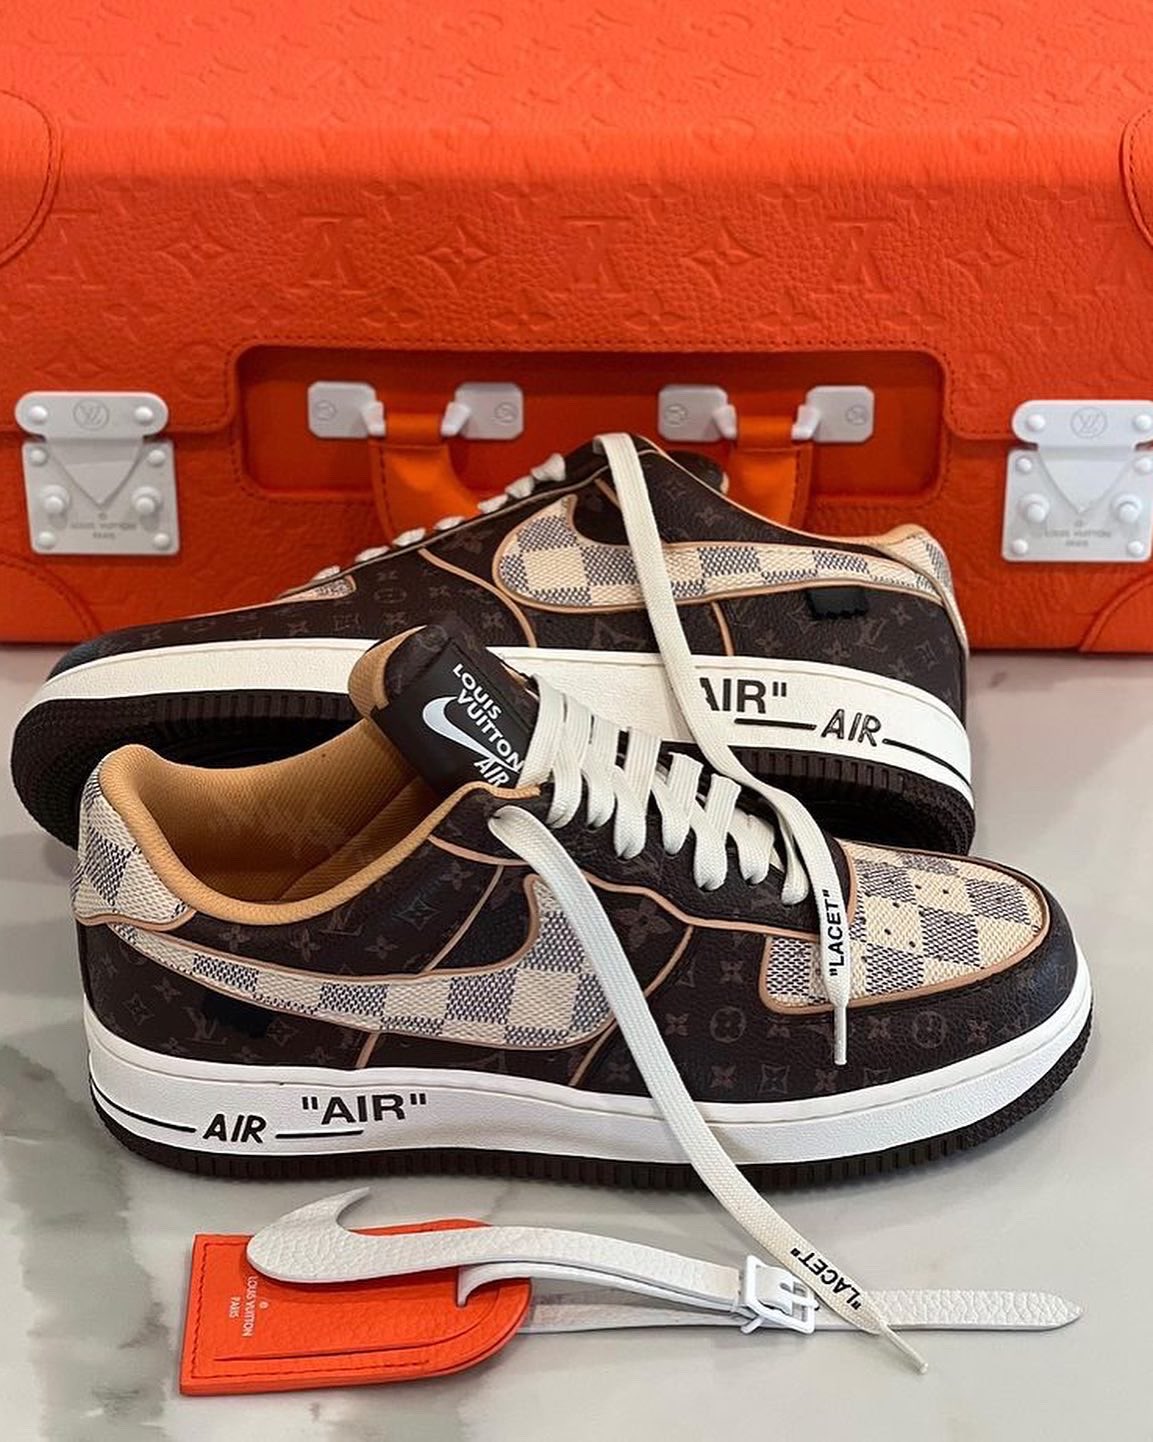 Louis Vuitton x Nike Air Force 1 Auction Release Date